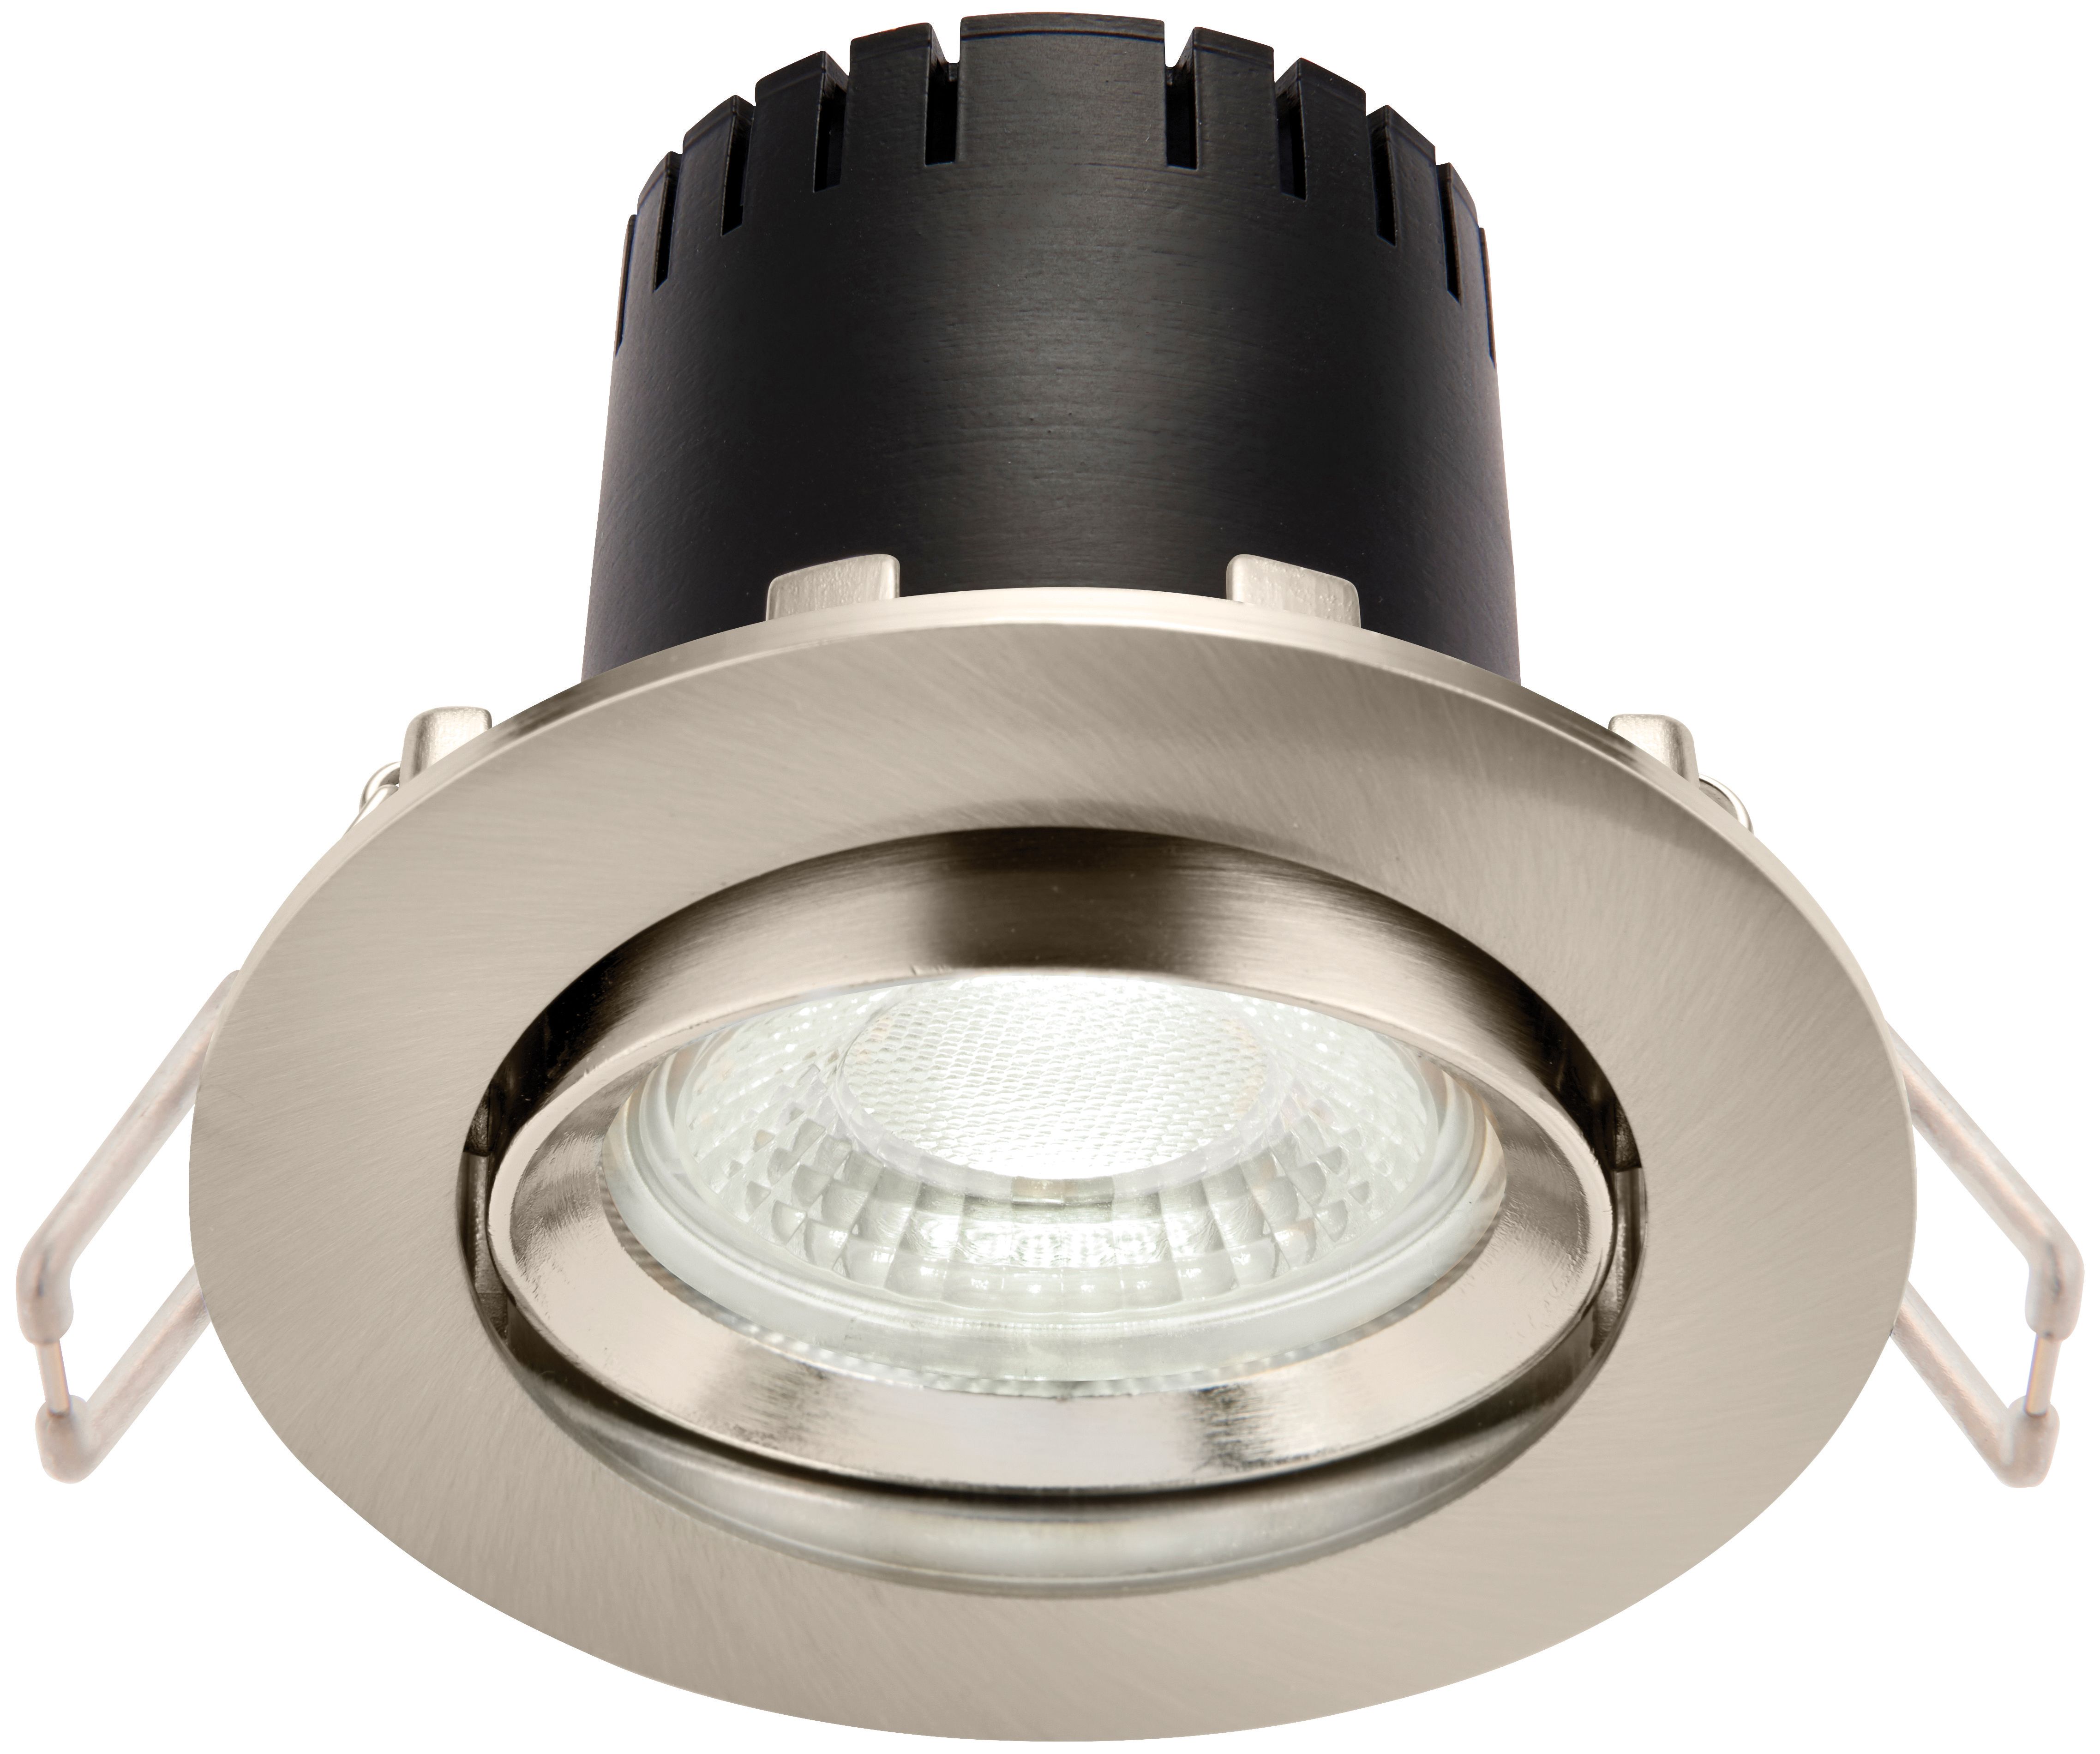 Saxby Integrated LED Adjustable Cool White Dimmable Downlight 5.5W - Brushed Nickel